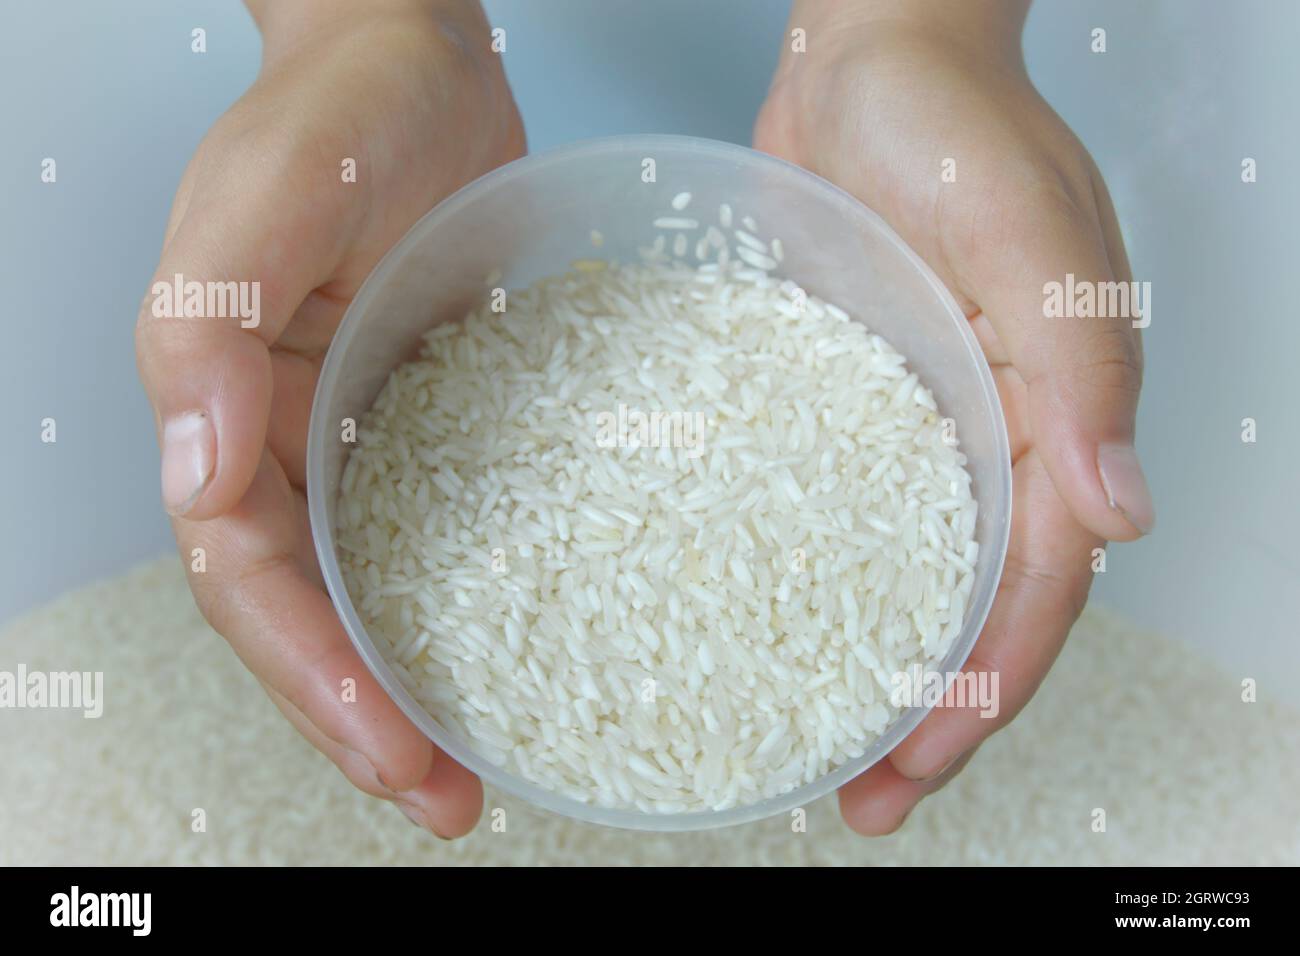 Cropped Hands Holding Rice In Bowl Stock Photo